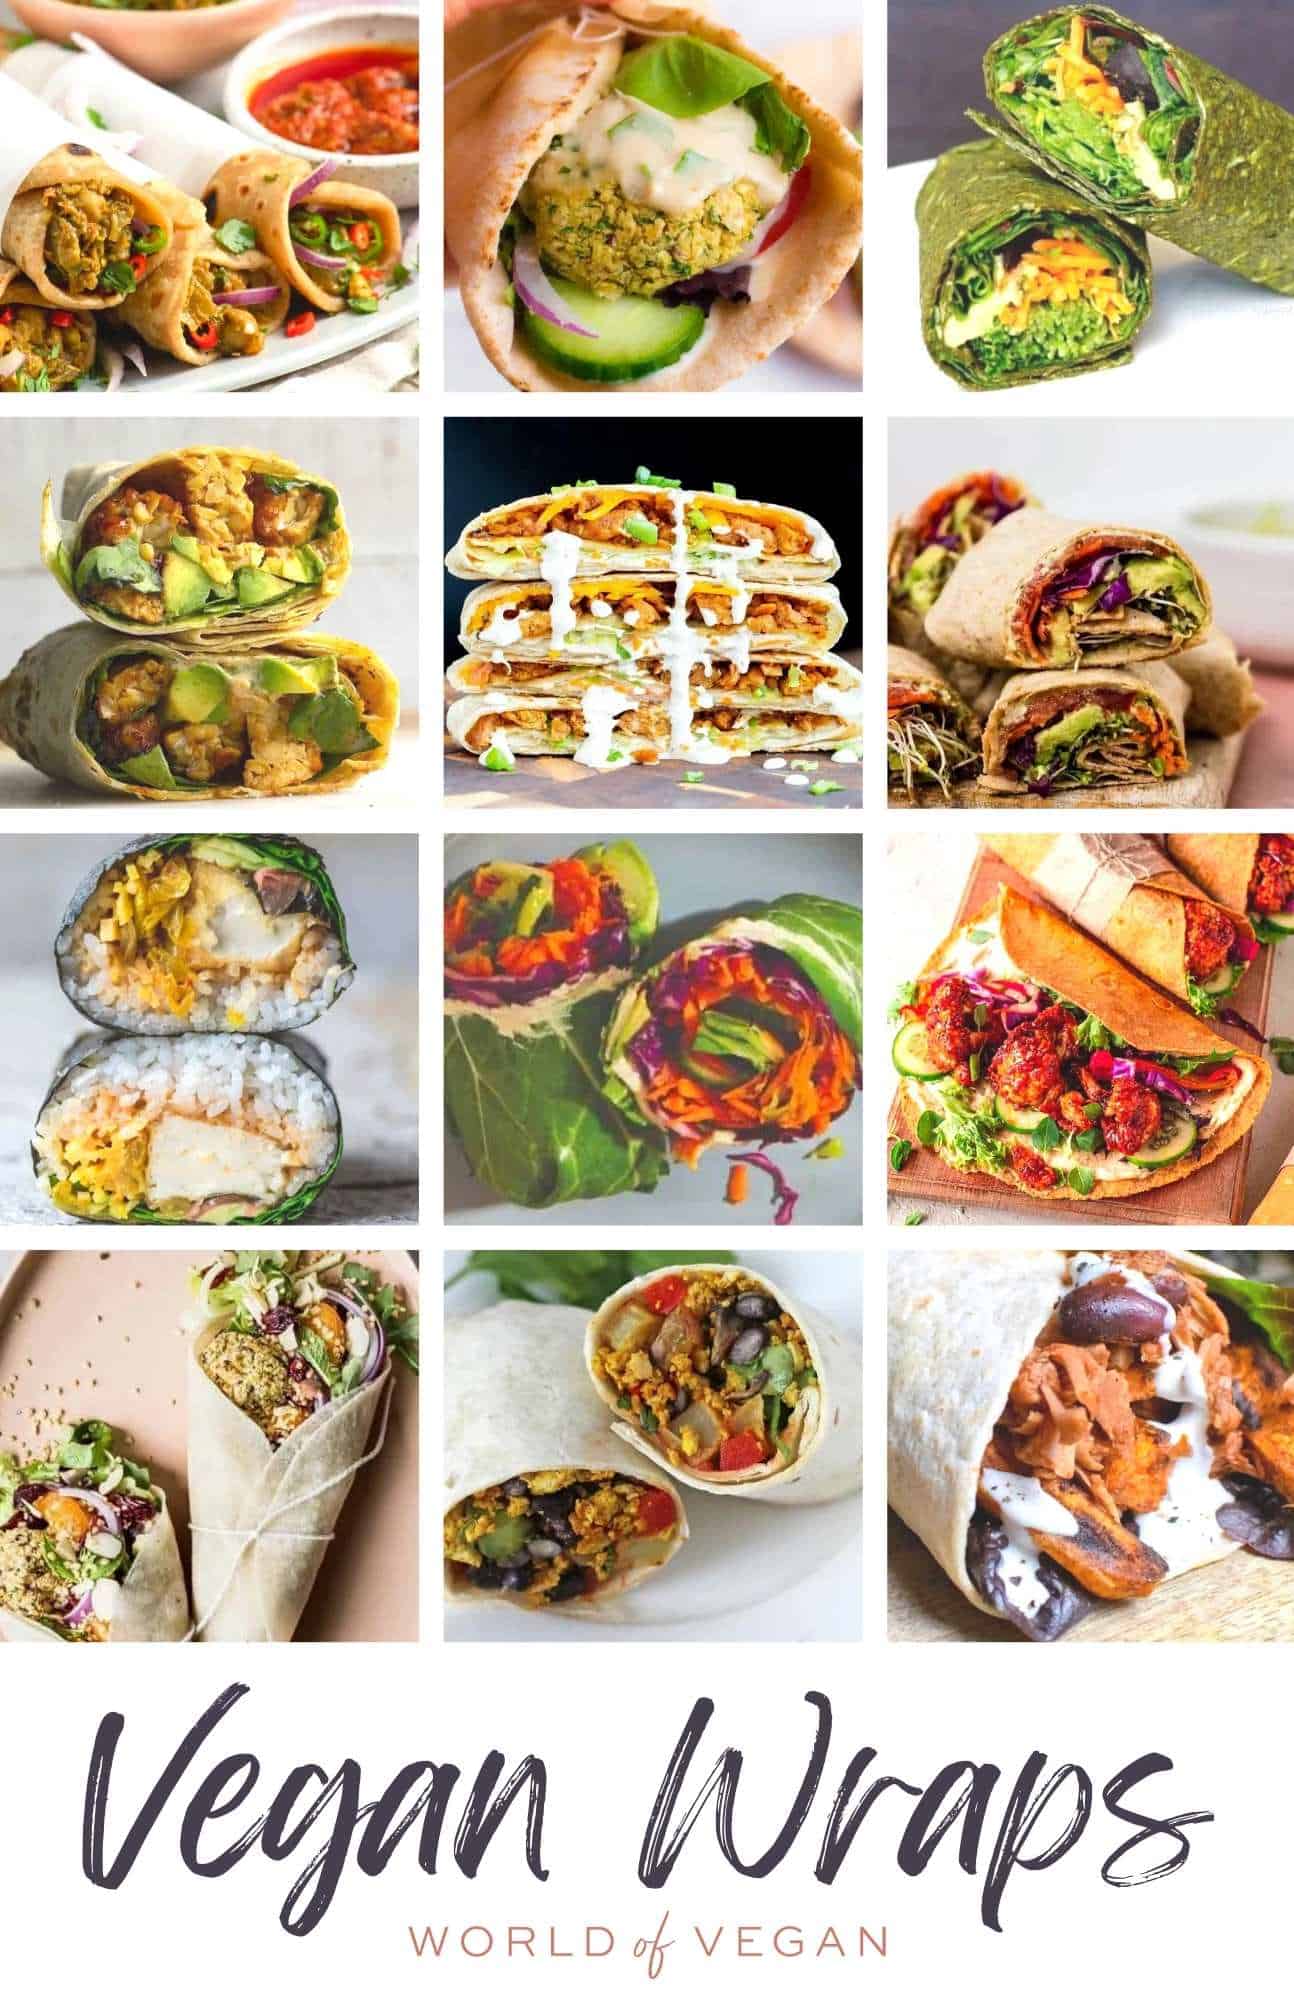 Vegan Wraps Recipes for Lunch